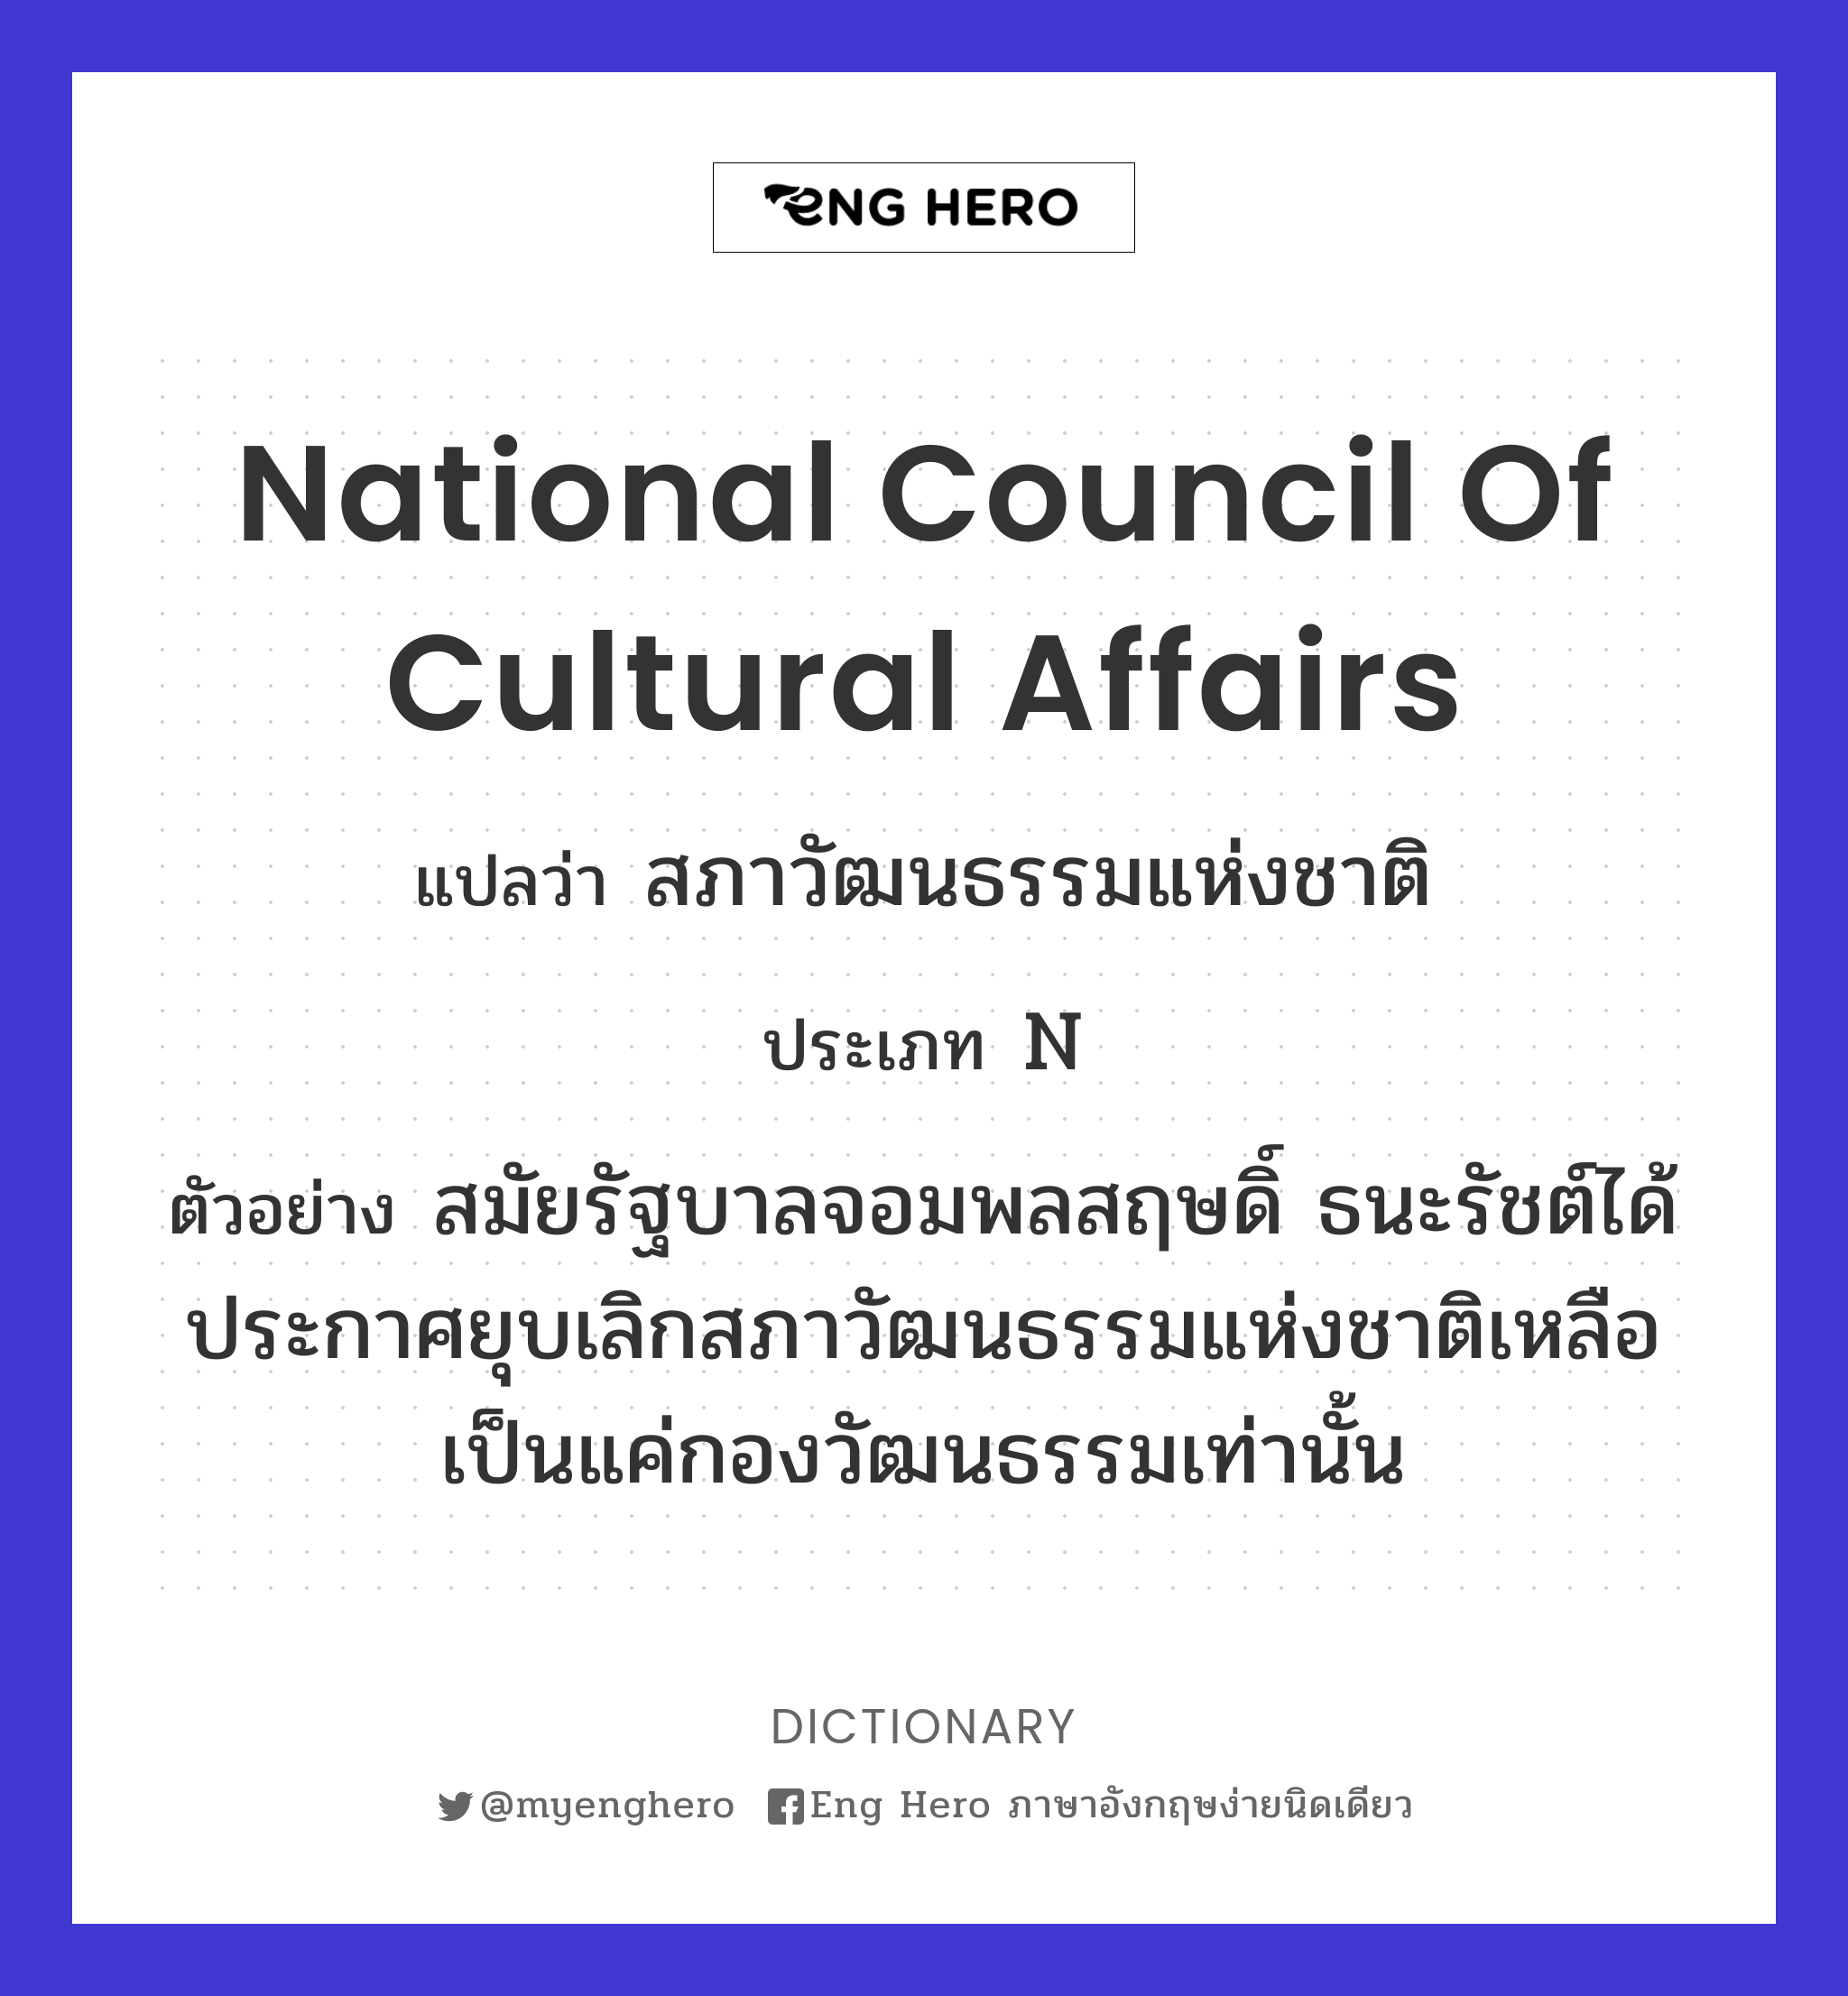 National Council of Cultural Affairs